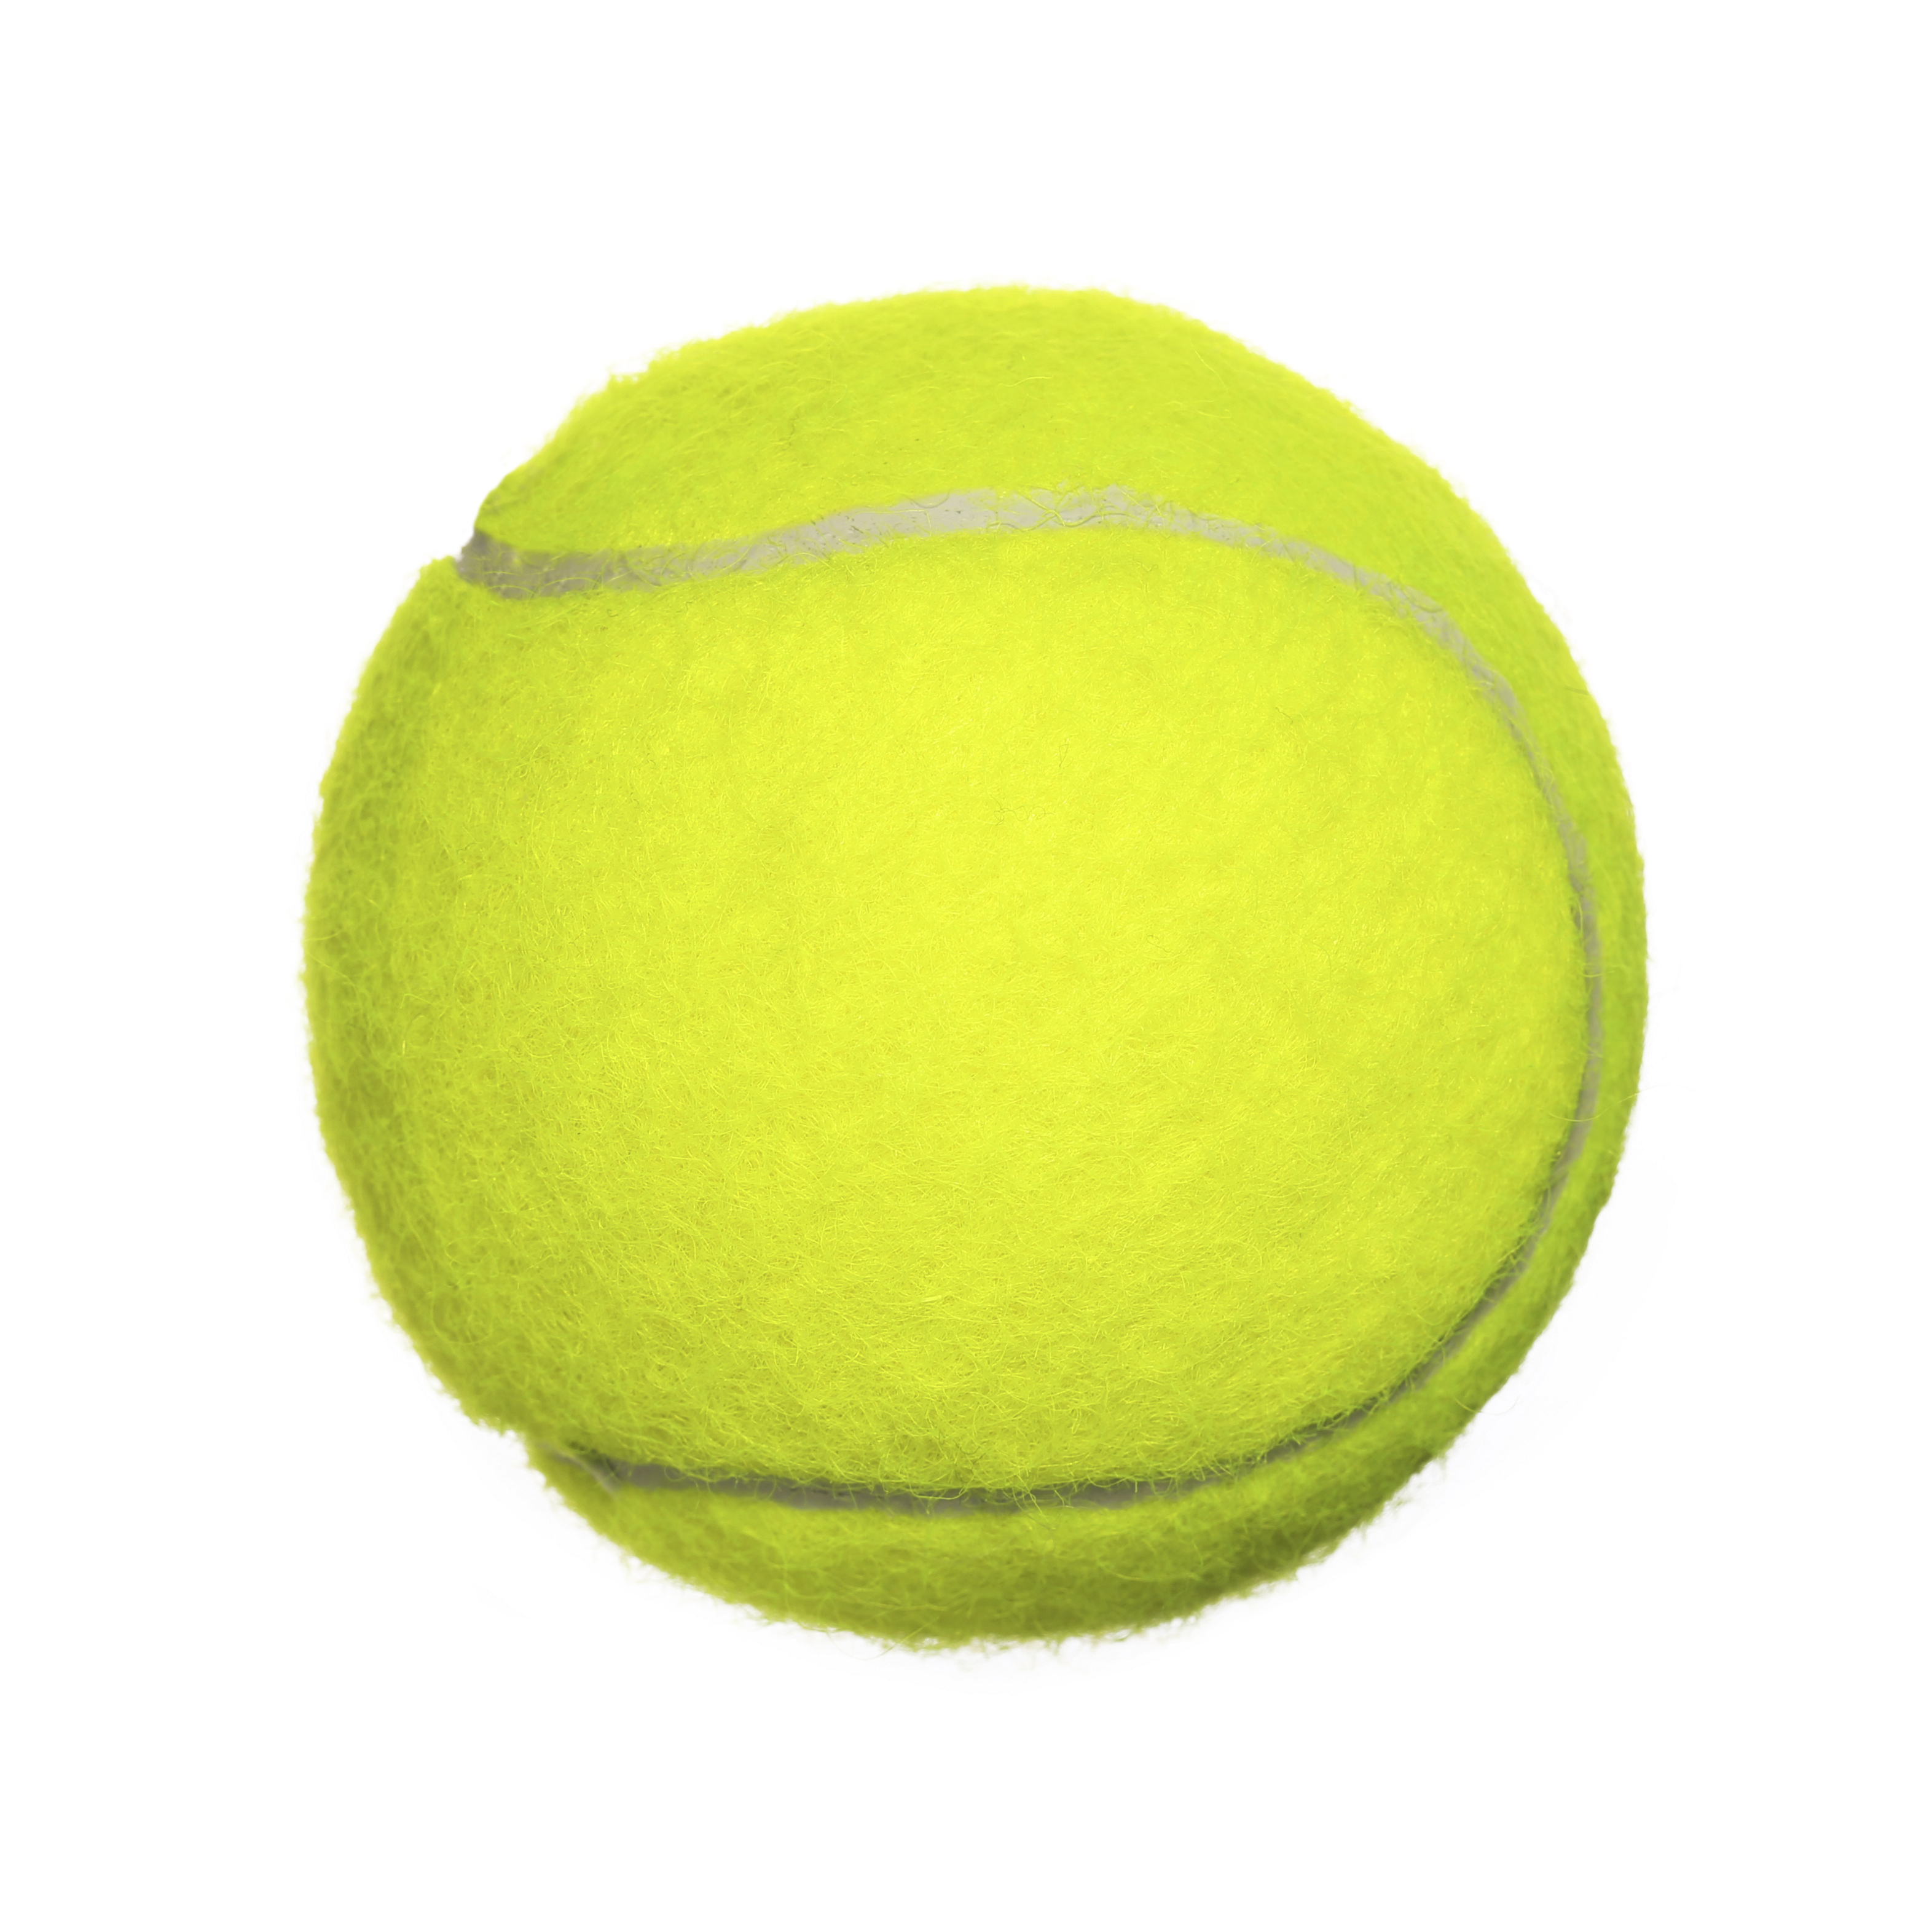 Behind the Fuzz: History of the Tennis Ball | Tennis Week